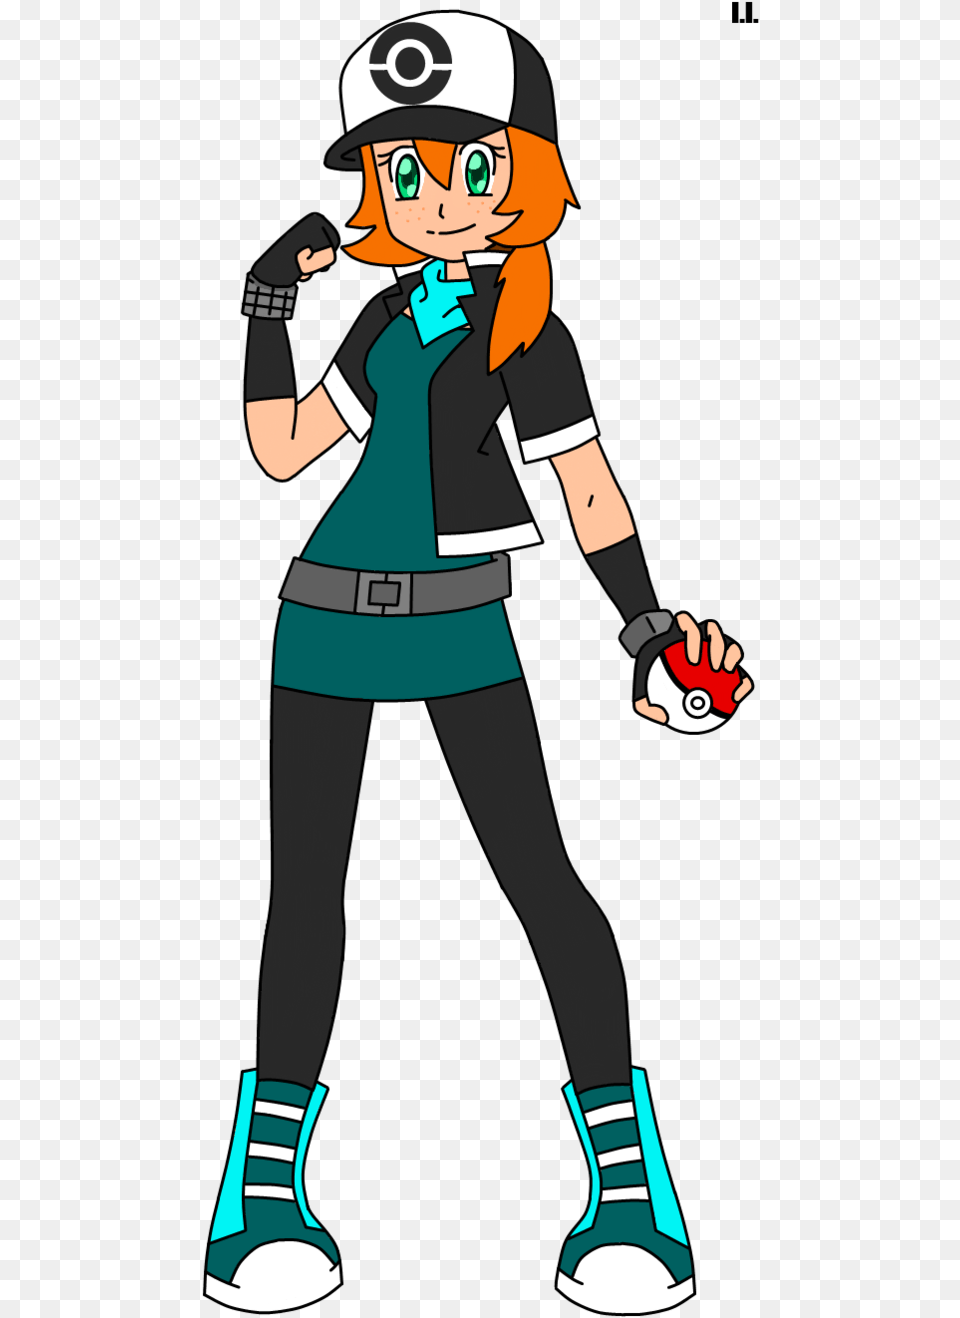 Pokemon Oc Cool Trainer Clipart Pokmon Pokemon Oc Cool Trainer, Person, Face, Head, Cartoon Free Png Download